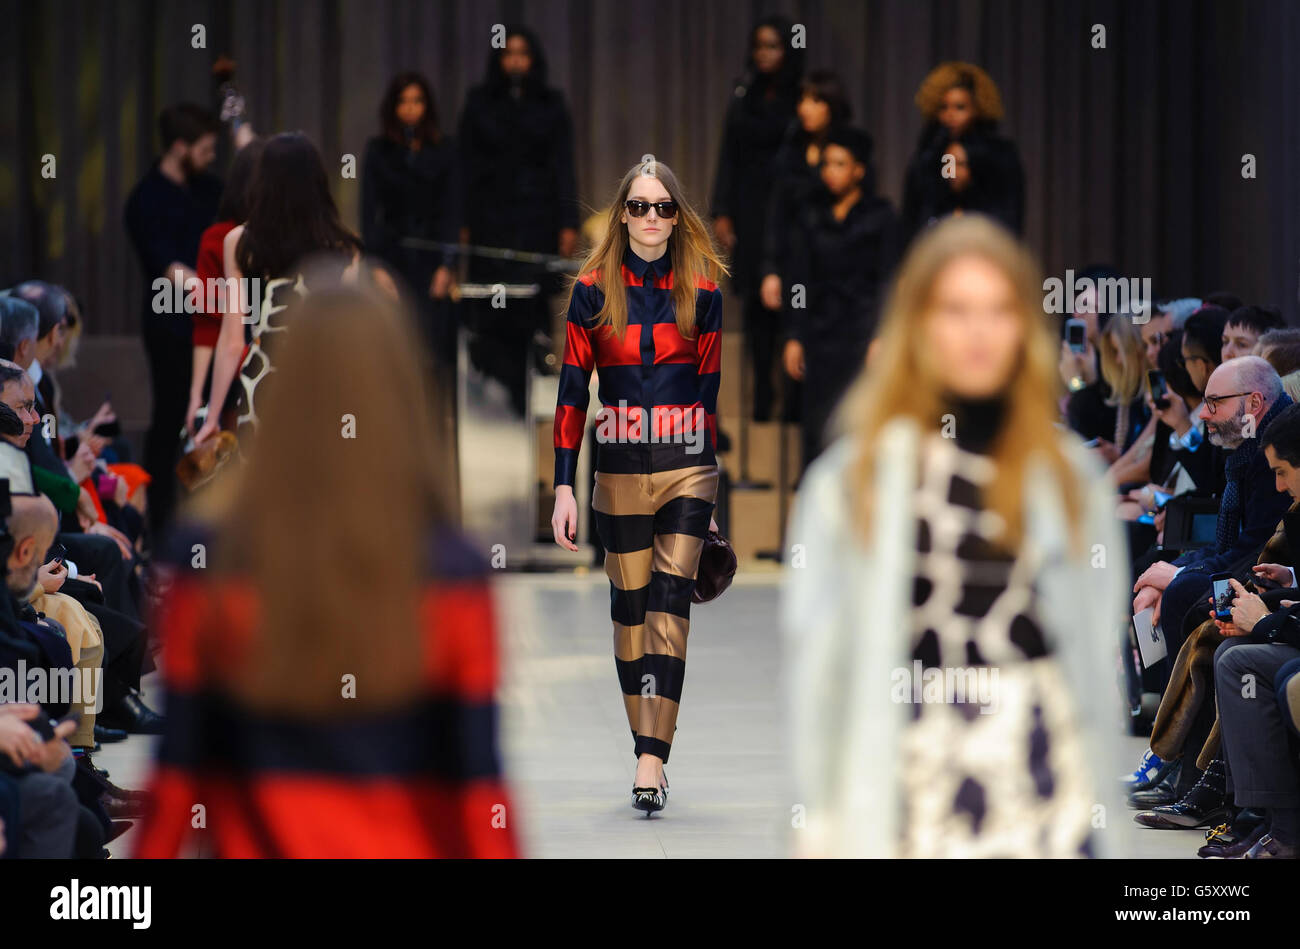 Models on the catwalk during the Burberry Prorsum catwalk show on day four of London Fashion Week, at Tate Modern, London. Stock Photo